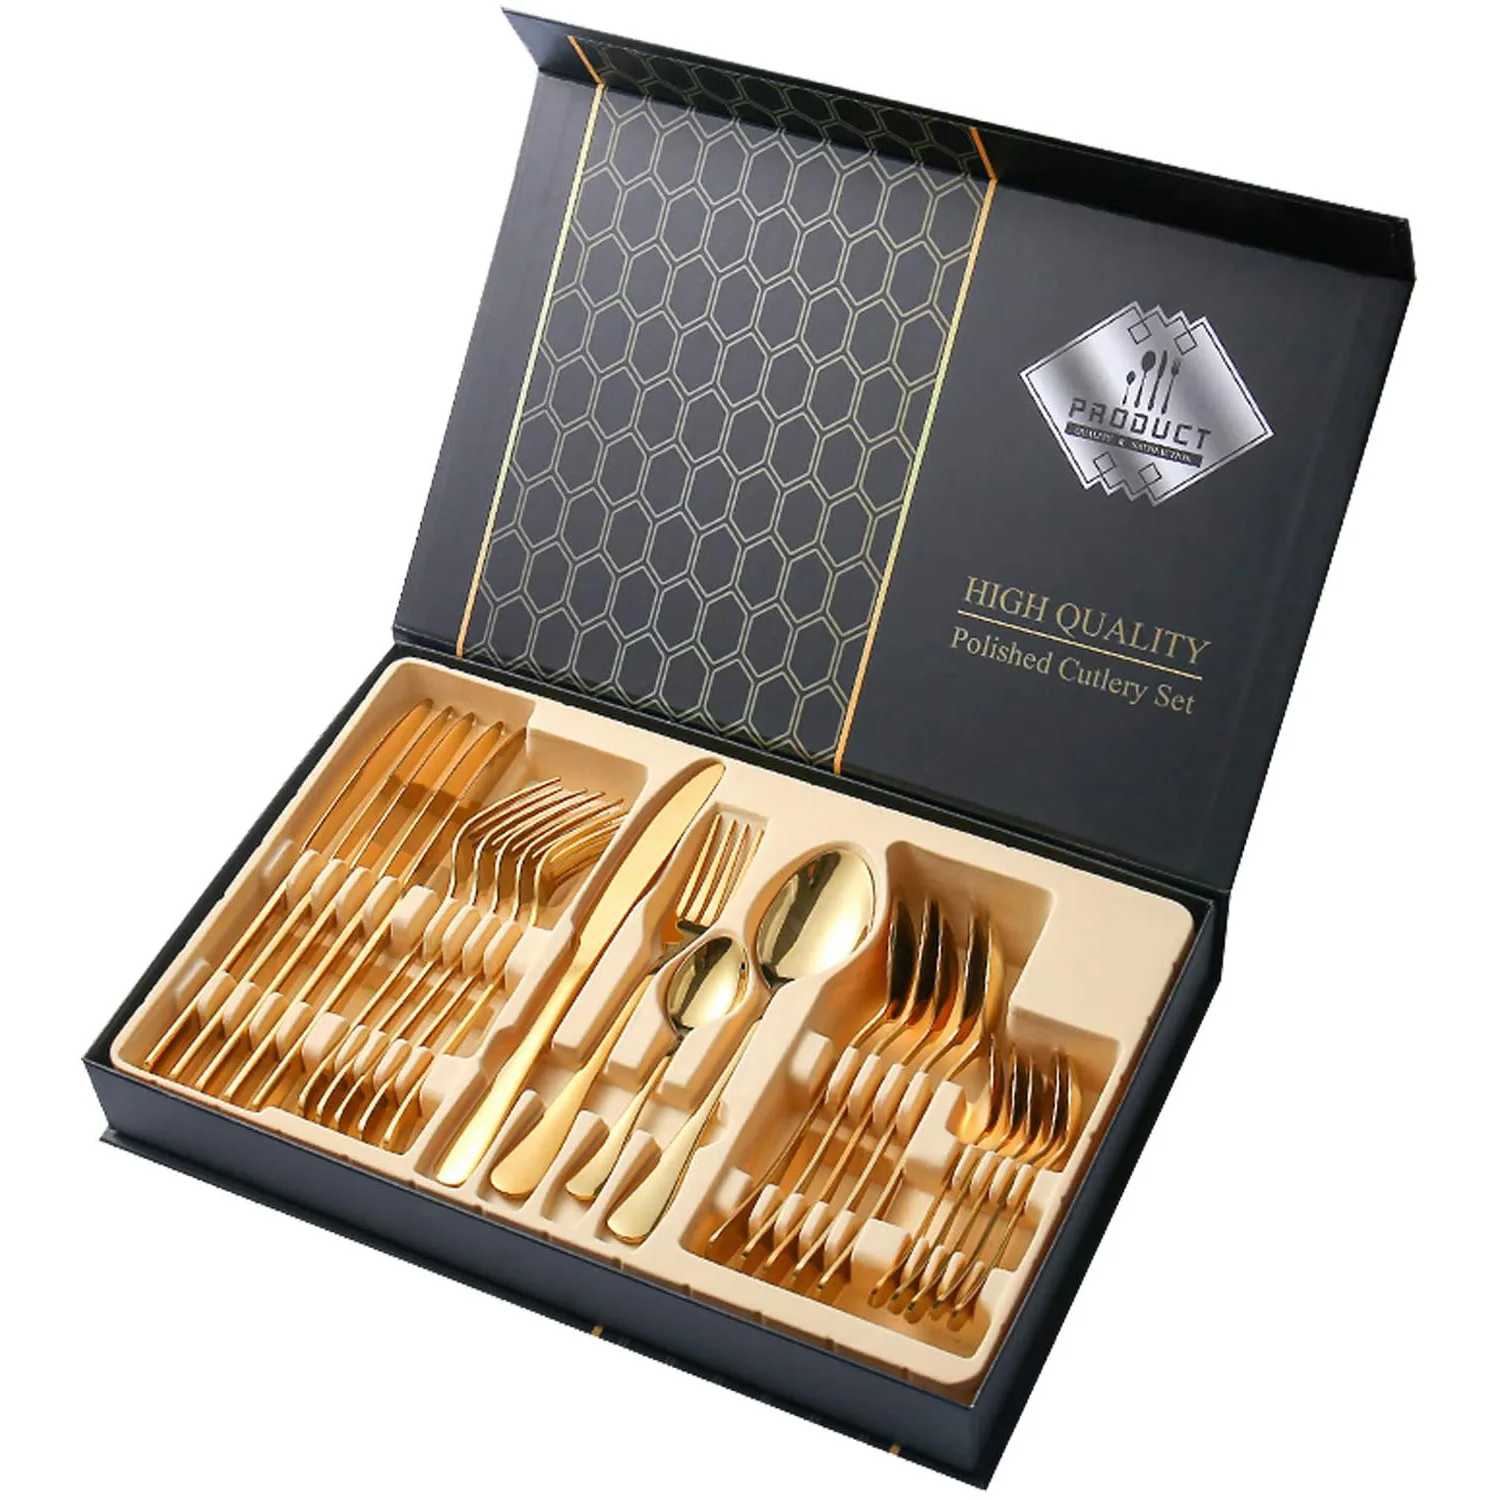 

Hot Sale Amazon Gold Besteck Gift With Box Kitchen Restaurant Mirror Metal Wedding Stainless Steel 24pcs Cutlery set, Silver / gold / rose gold / black / colorful